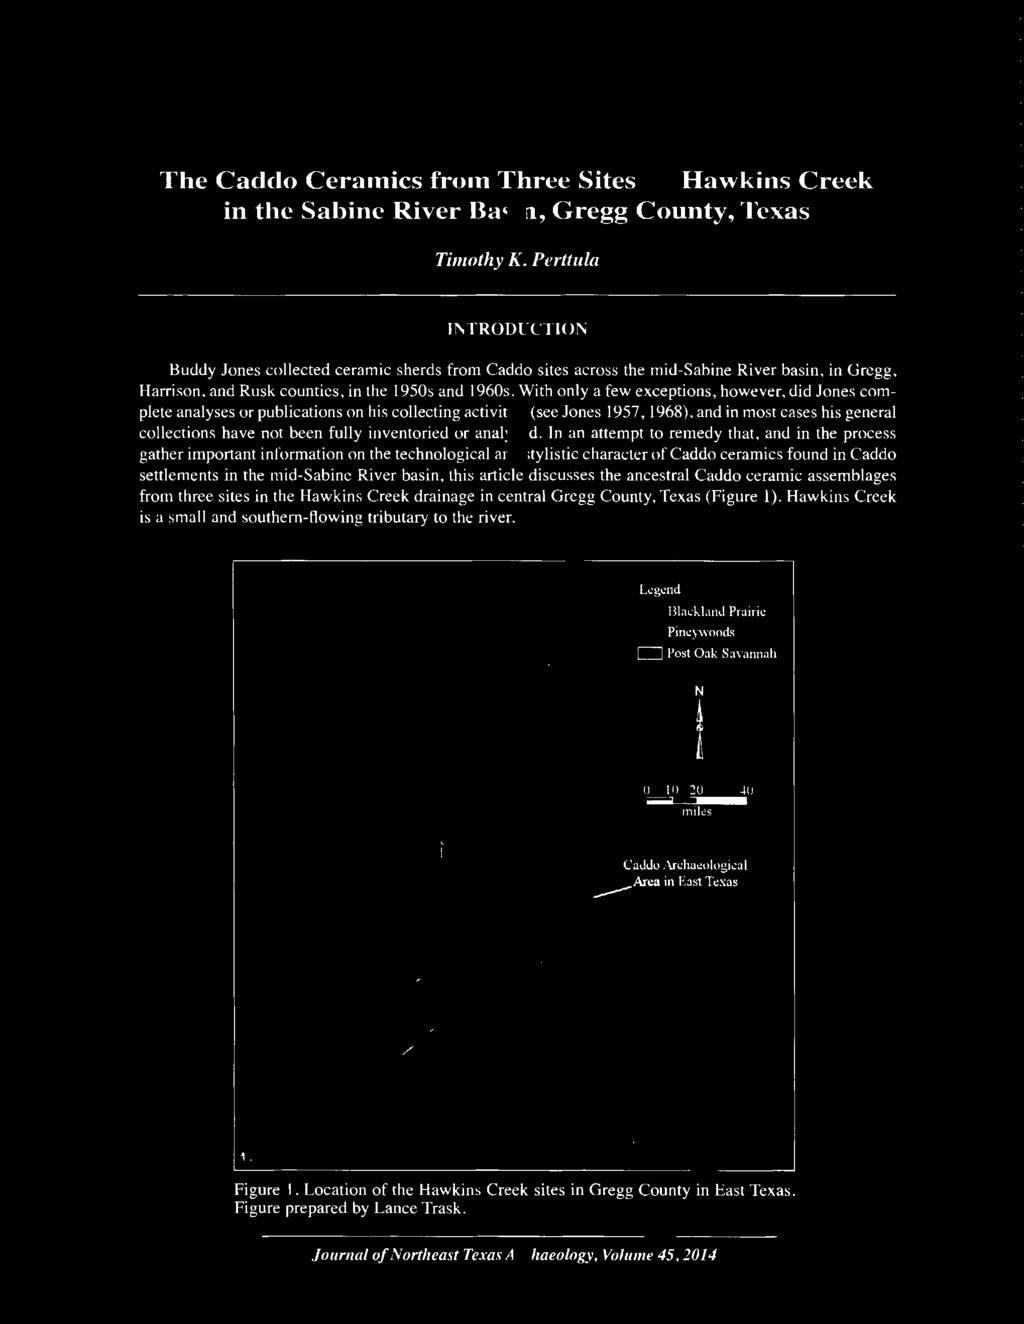 In an attempt to remedy that, and in the process gather important information on the technological and stylistic character of Caddo ceramics found in Caddo settlements in the mid-sabine River basin,